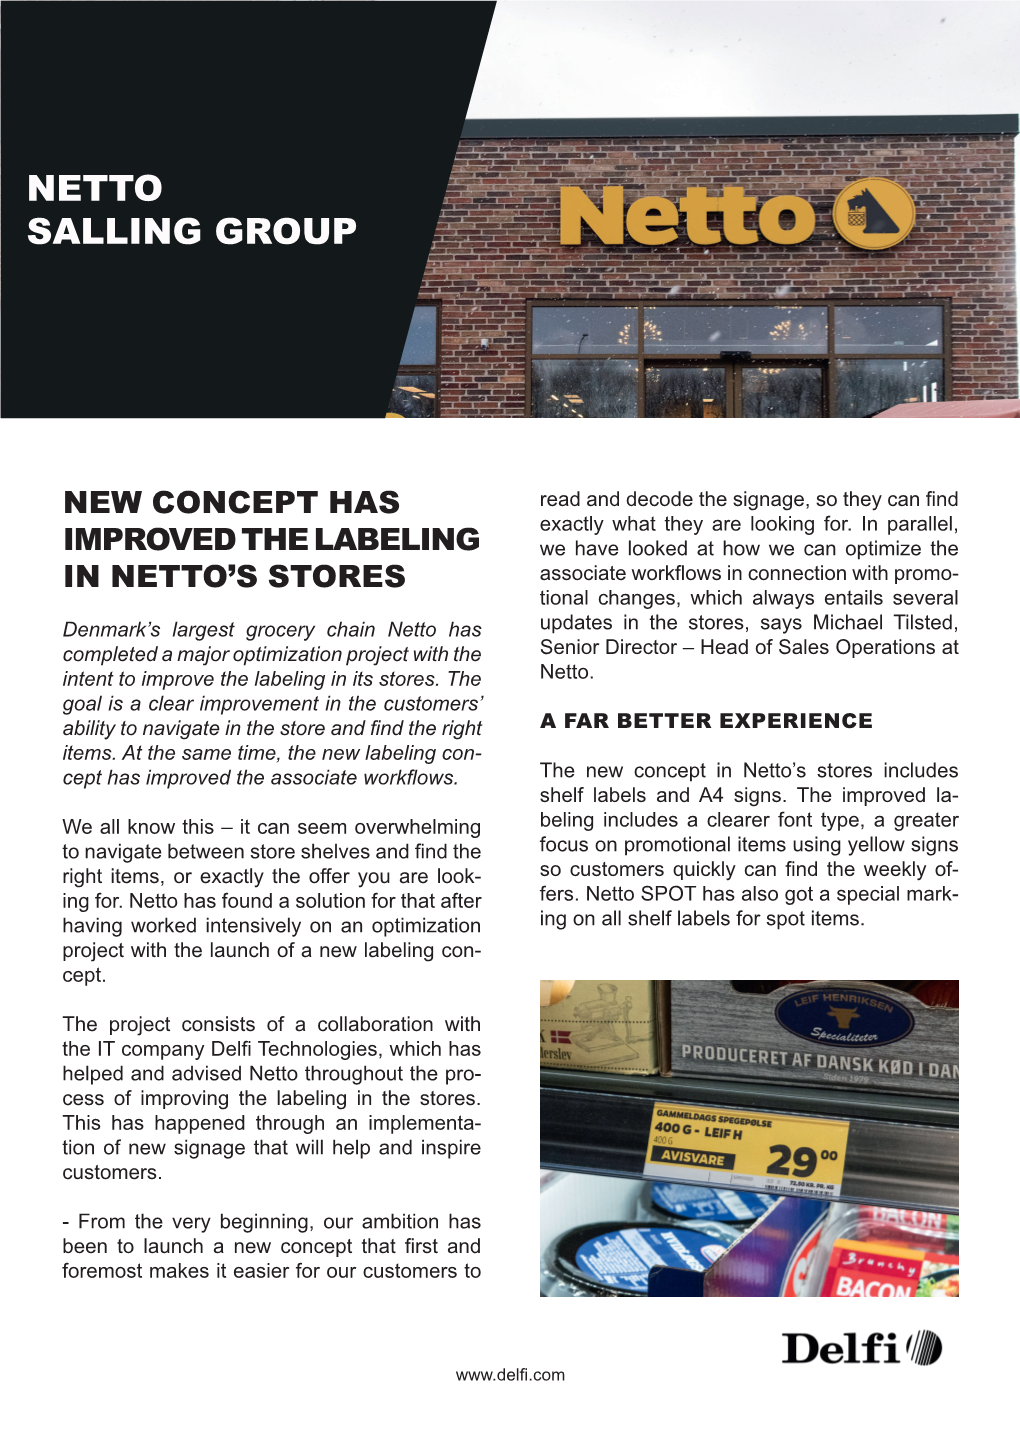 Netto Salling Group